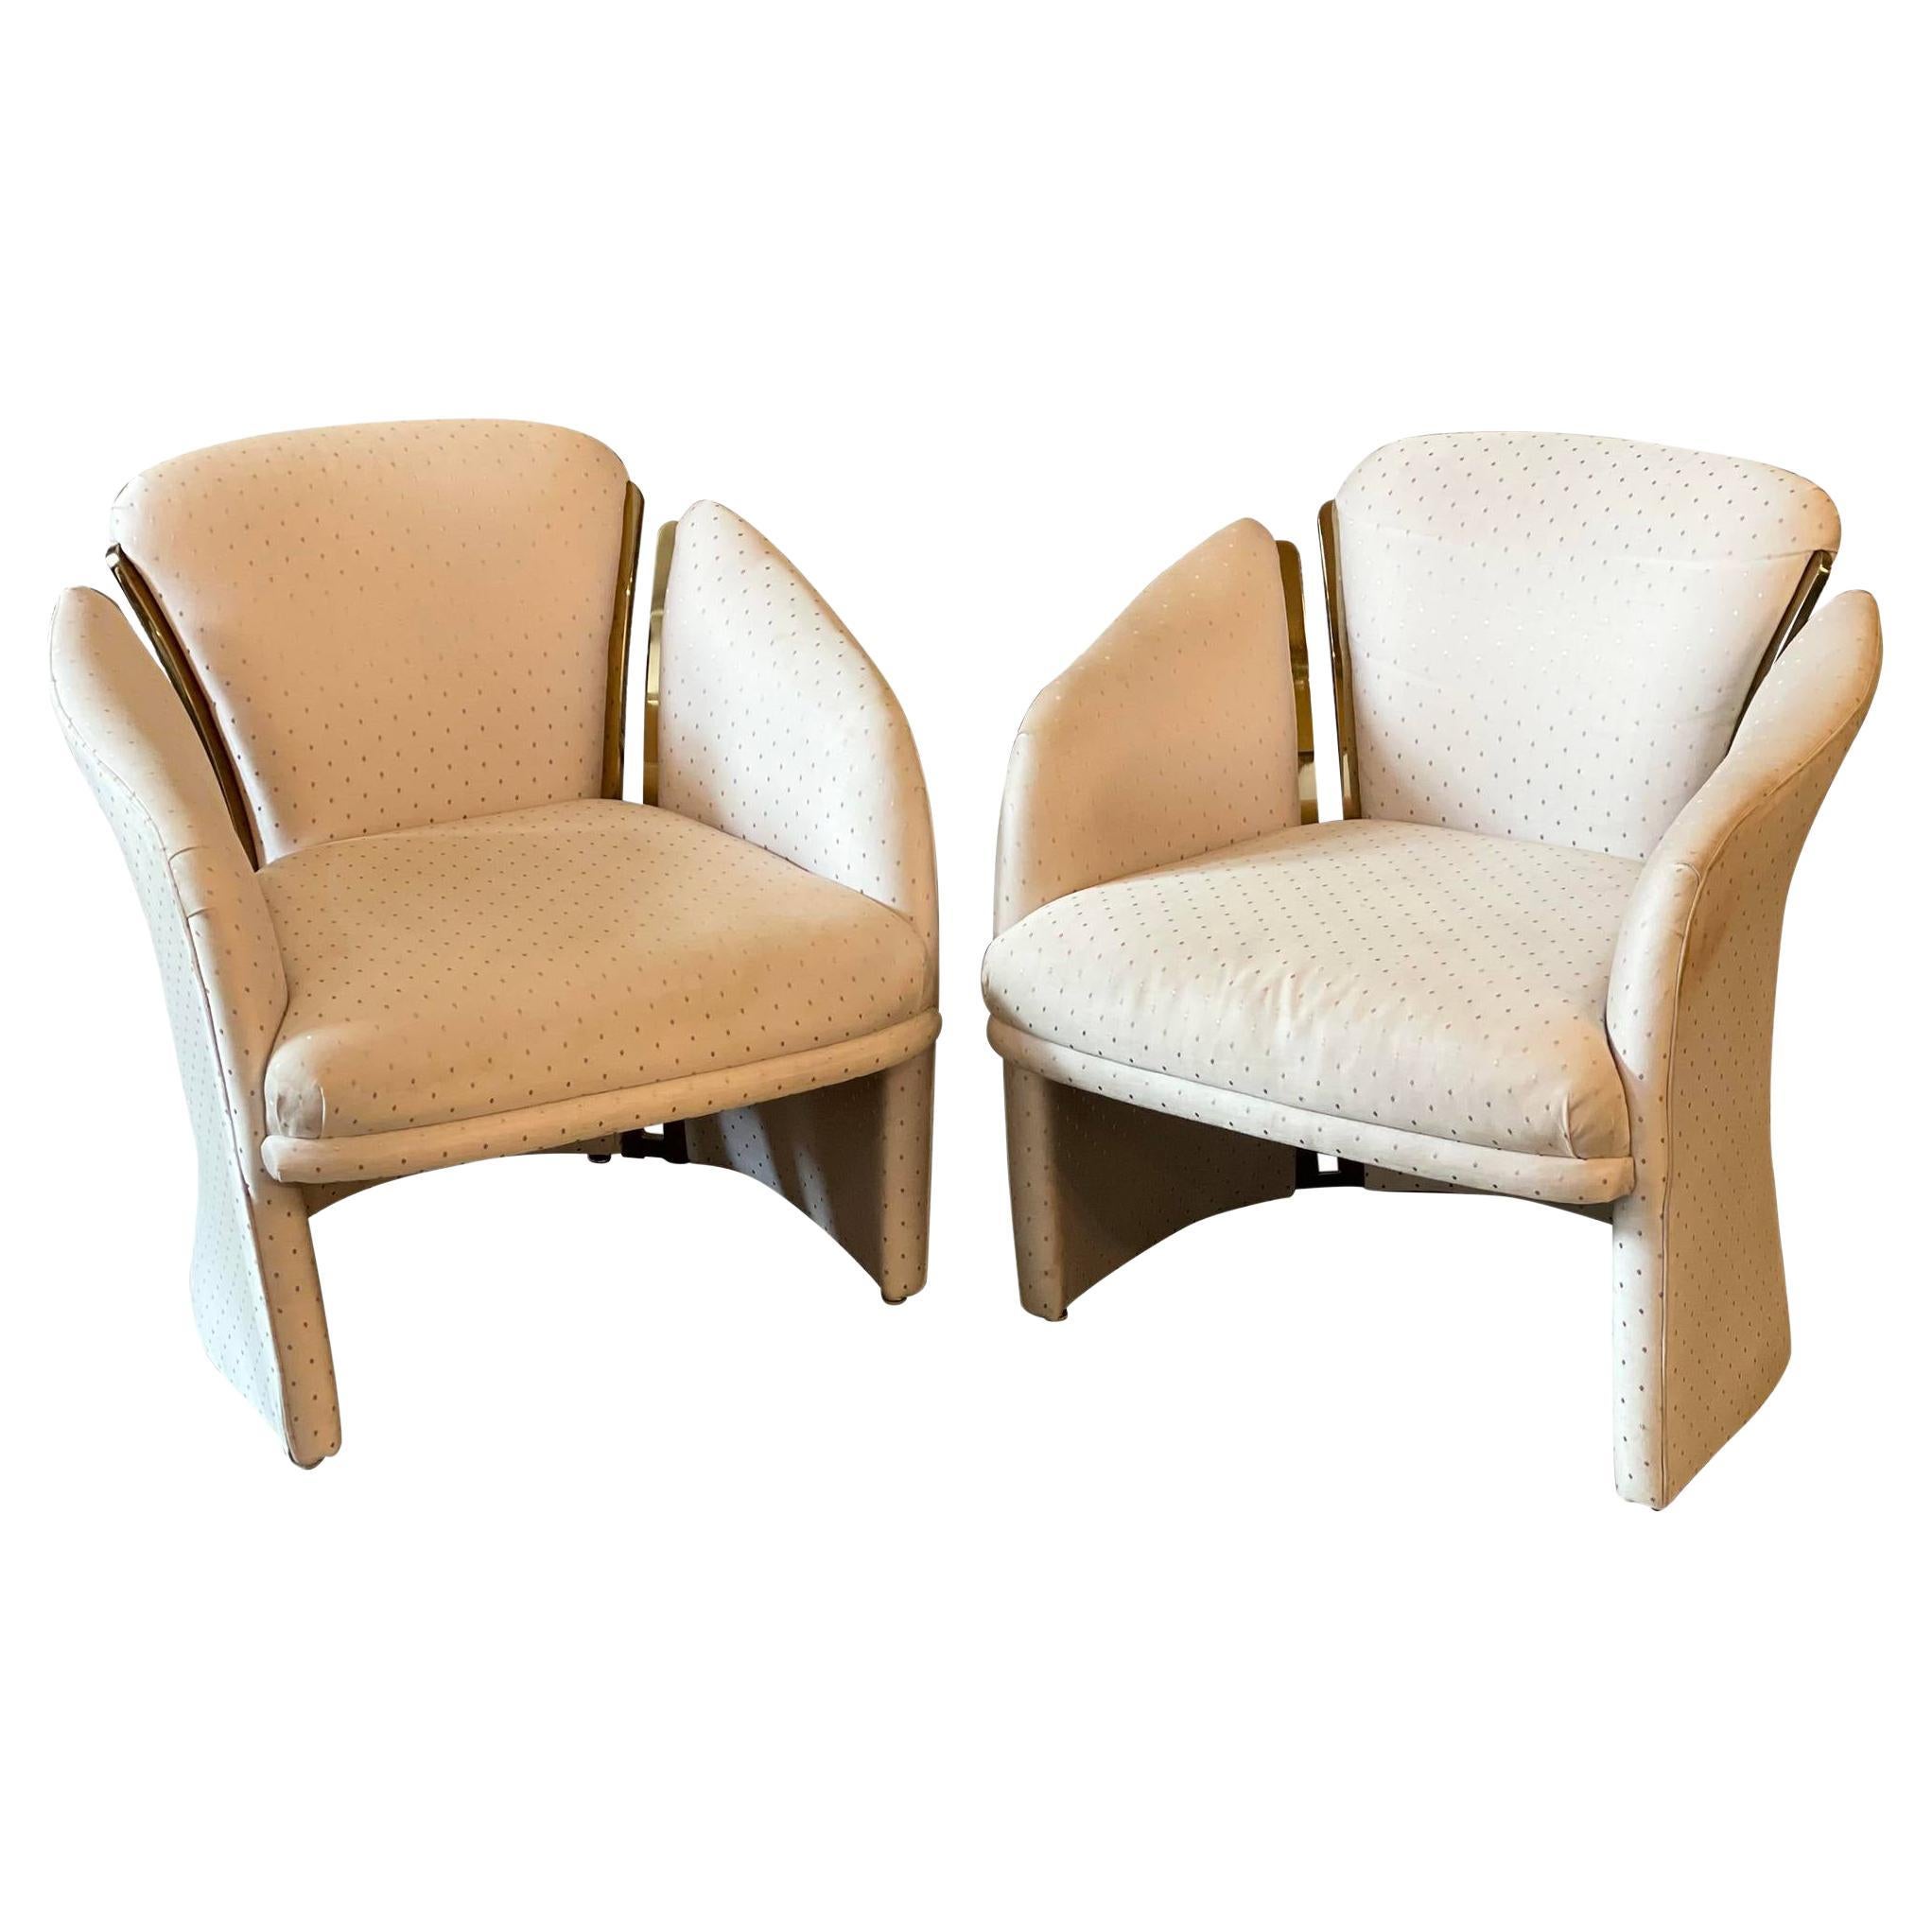 1980s Vintage Postmodern Chairs in Upholstery with Brass, a Pair